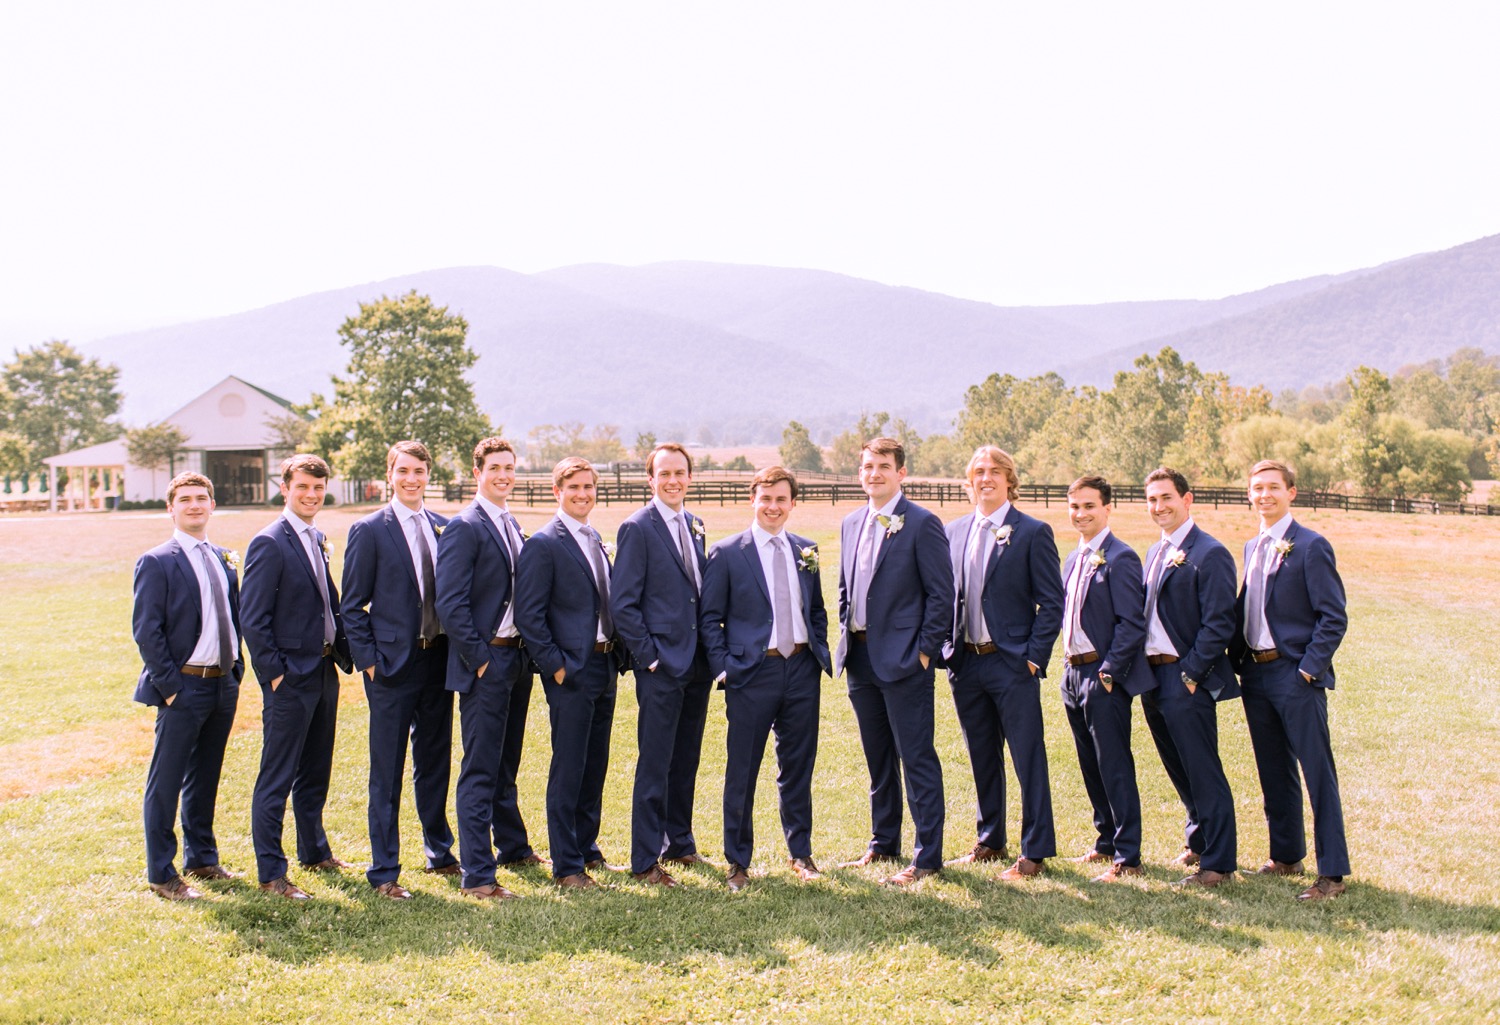 groom and groomsmen in their navy blue suits before the wedding ceremony begins